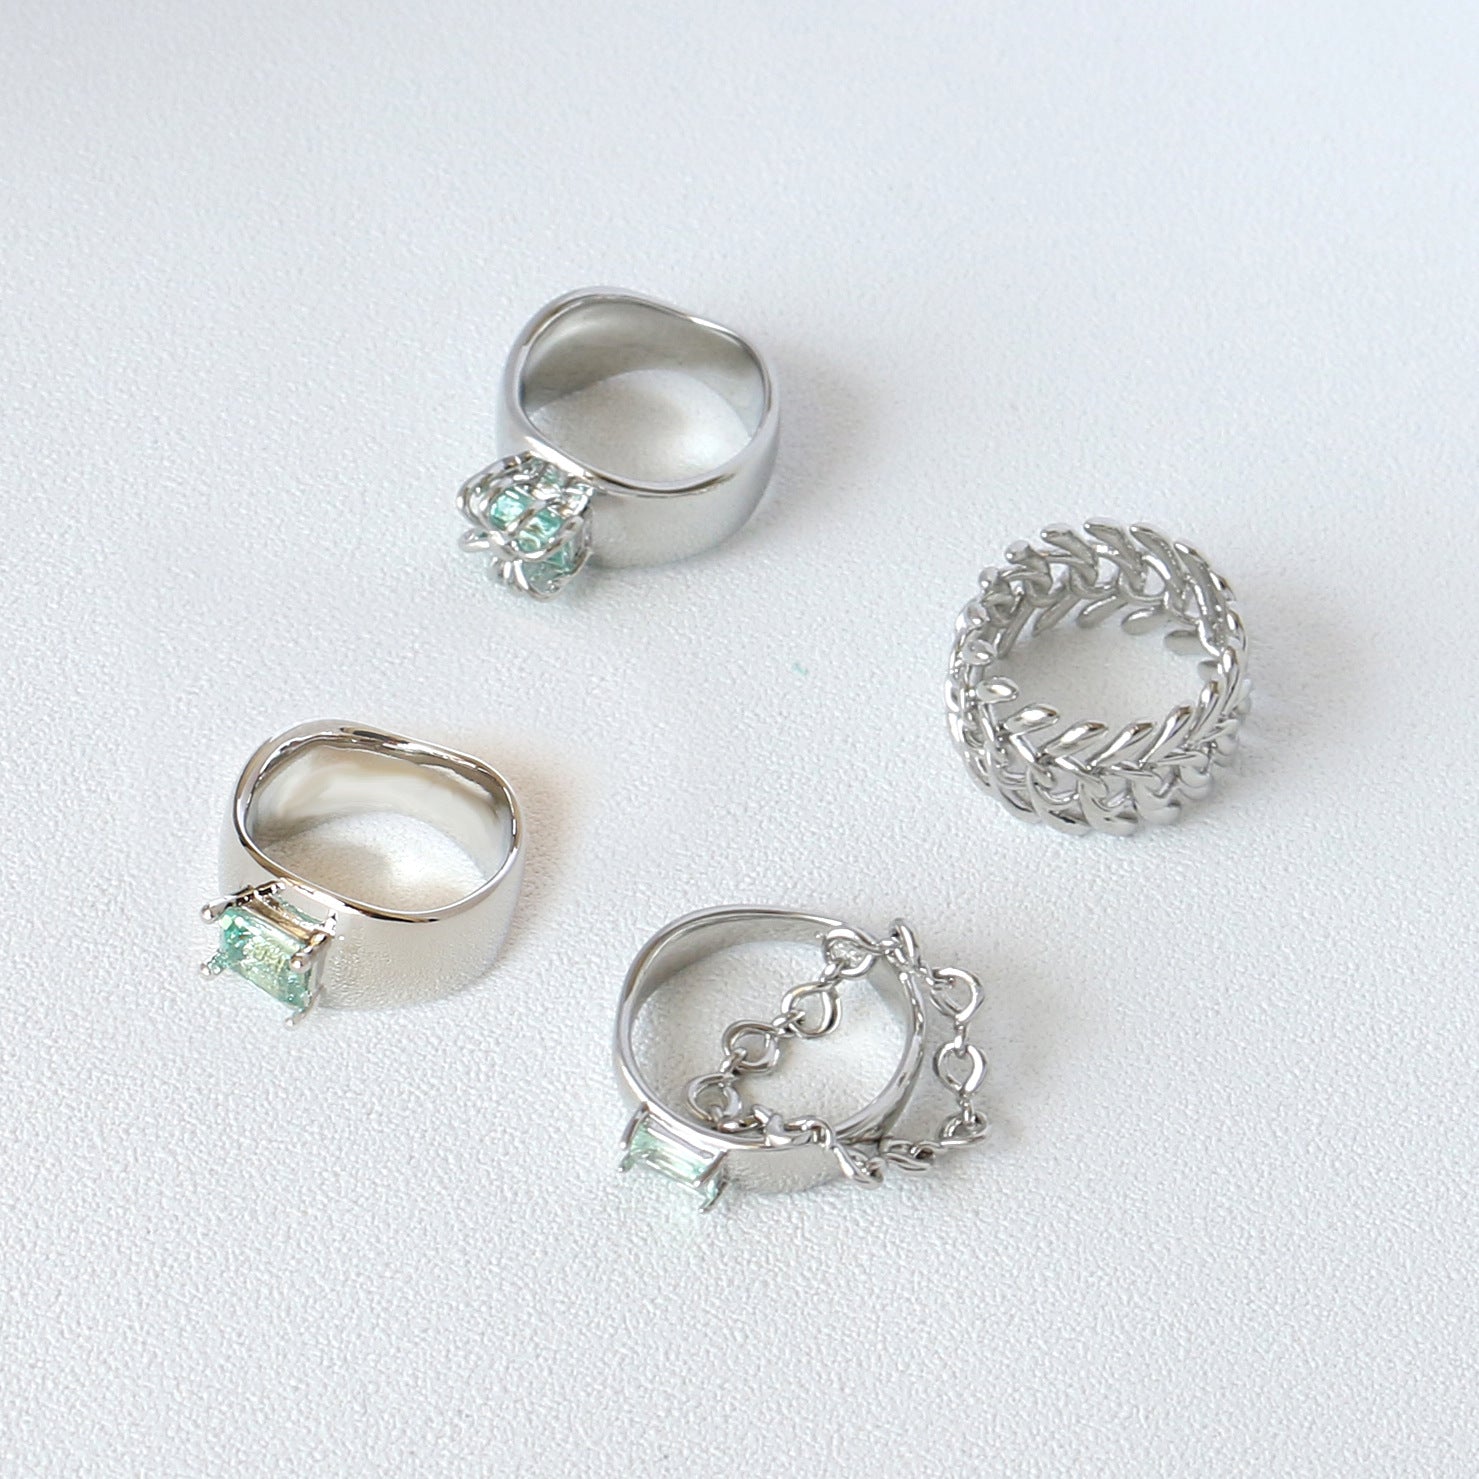 A Cold Wind Couple Ring with a green stone in the middle by Maramalive™.